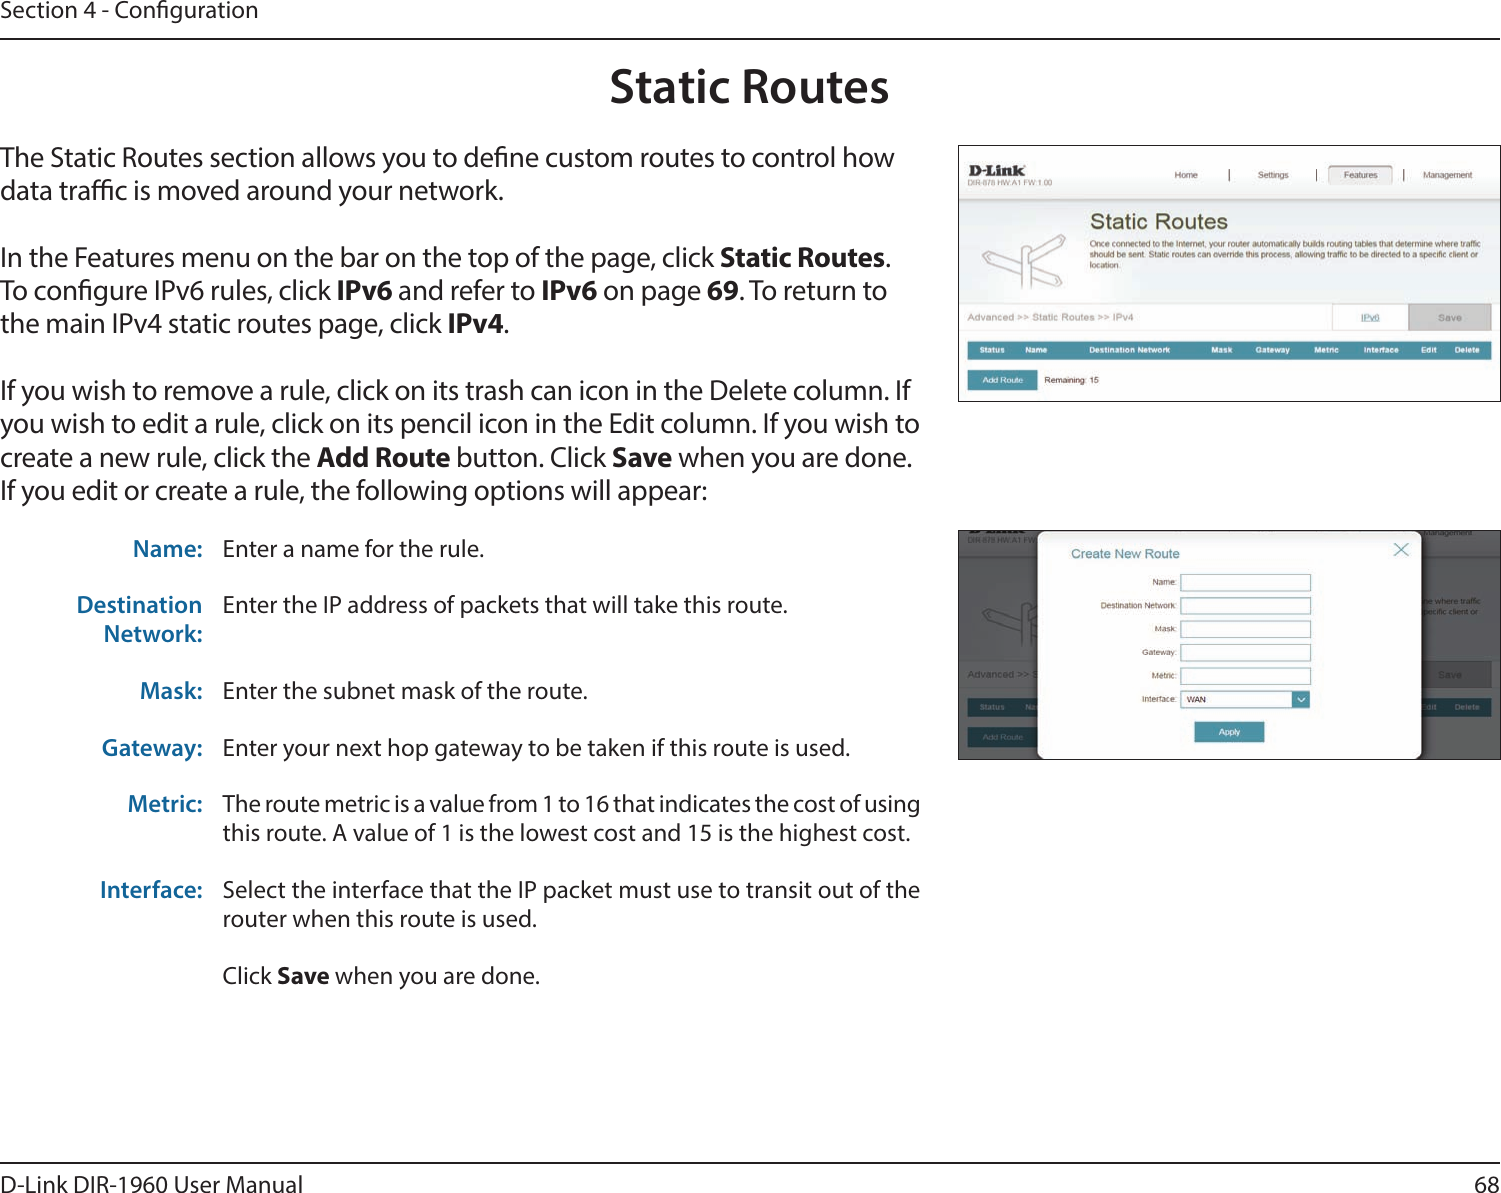 68D-Link DIR-1960 User ManualSection 4 - CongurationStatic RoutesThe Static Routes section allows you to dene custom routes to control how data trac is moved around your network.In the Features menu on the bar on the top of the page, click Static Routes.To congure IPv6 rules, click IPv6 and refer to IPv6 on page 69. To return to the main IPv4 static routes page, click IPv4.If you wish to remove a rule, click on its trash can icon in the Delete column. If you wish to edit a rule, click on its pencil icon in the Edit column. If you wish to create a new rule, click the Add Route button. Click Save when you are done. If you edit or create a rule, the following options will appear:Name: Enter a name for the rule.Destination Network:Enter the IP address of packets that will take this route.Mask: Enter the subnet mask of the route.Gateway: Enter your next hop gateway to be taken if this route is used.Metric: The route metric is a value from 1 to 16 that indicates the cost of using this route. A value of 1 is the lowest cost and 15 is the highest cost.Interface: Select the interface that the IP packet must use to transit out of the router when this route is used.Click Save when you are done.